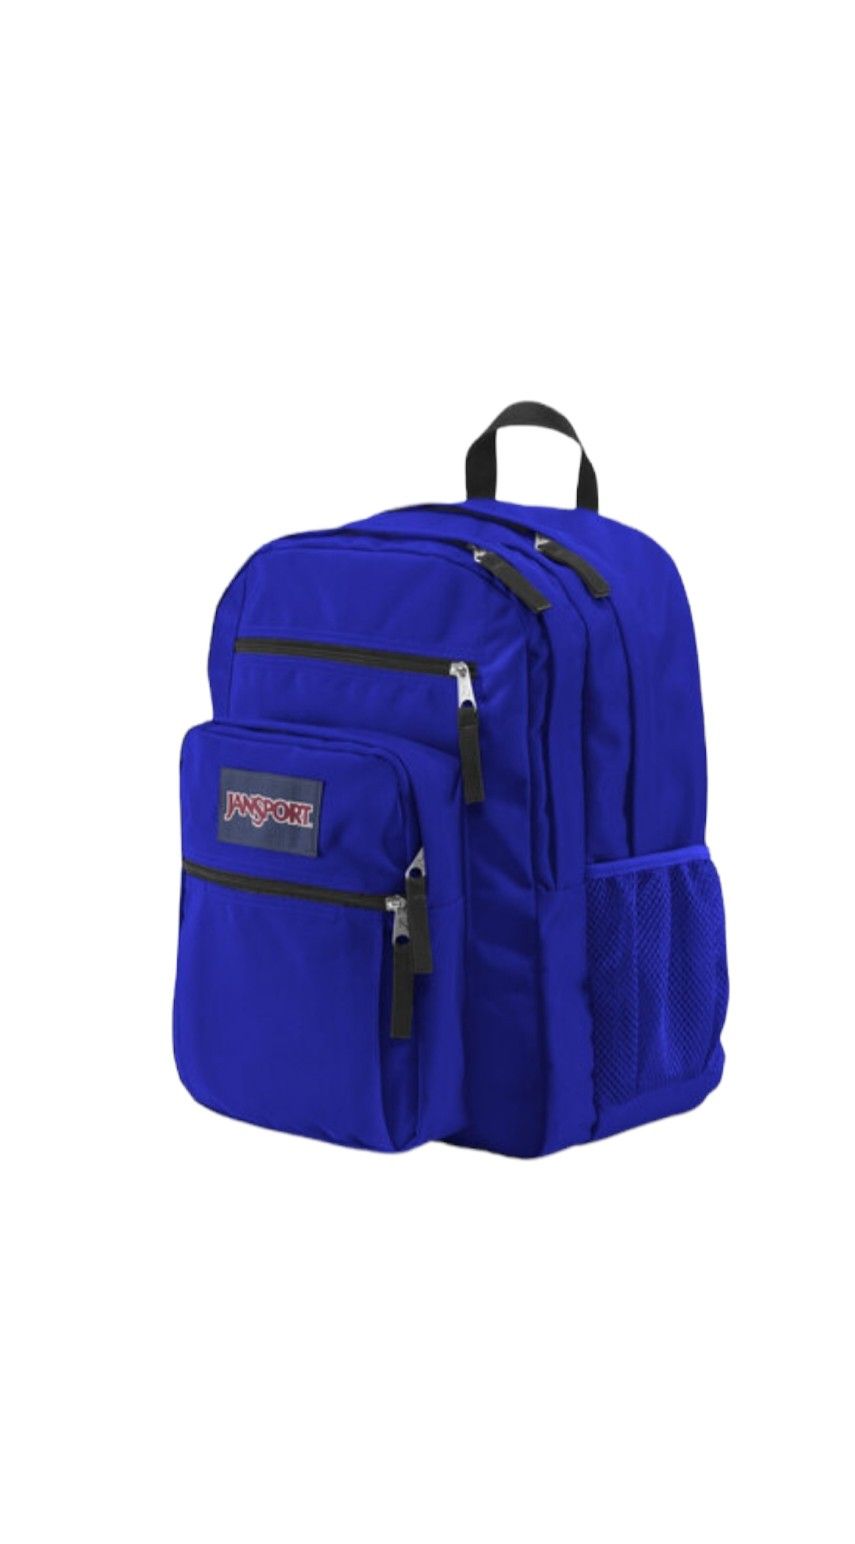 Brand NEW! Jansport Big student Regal Blue Backpack For School/Work/Outdoors/Traveling/Everyday Use/Sports/Gym/Gifts 